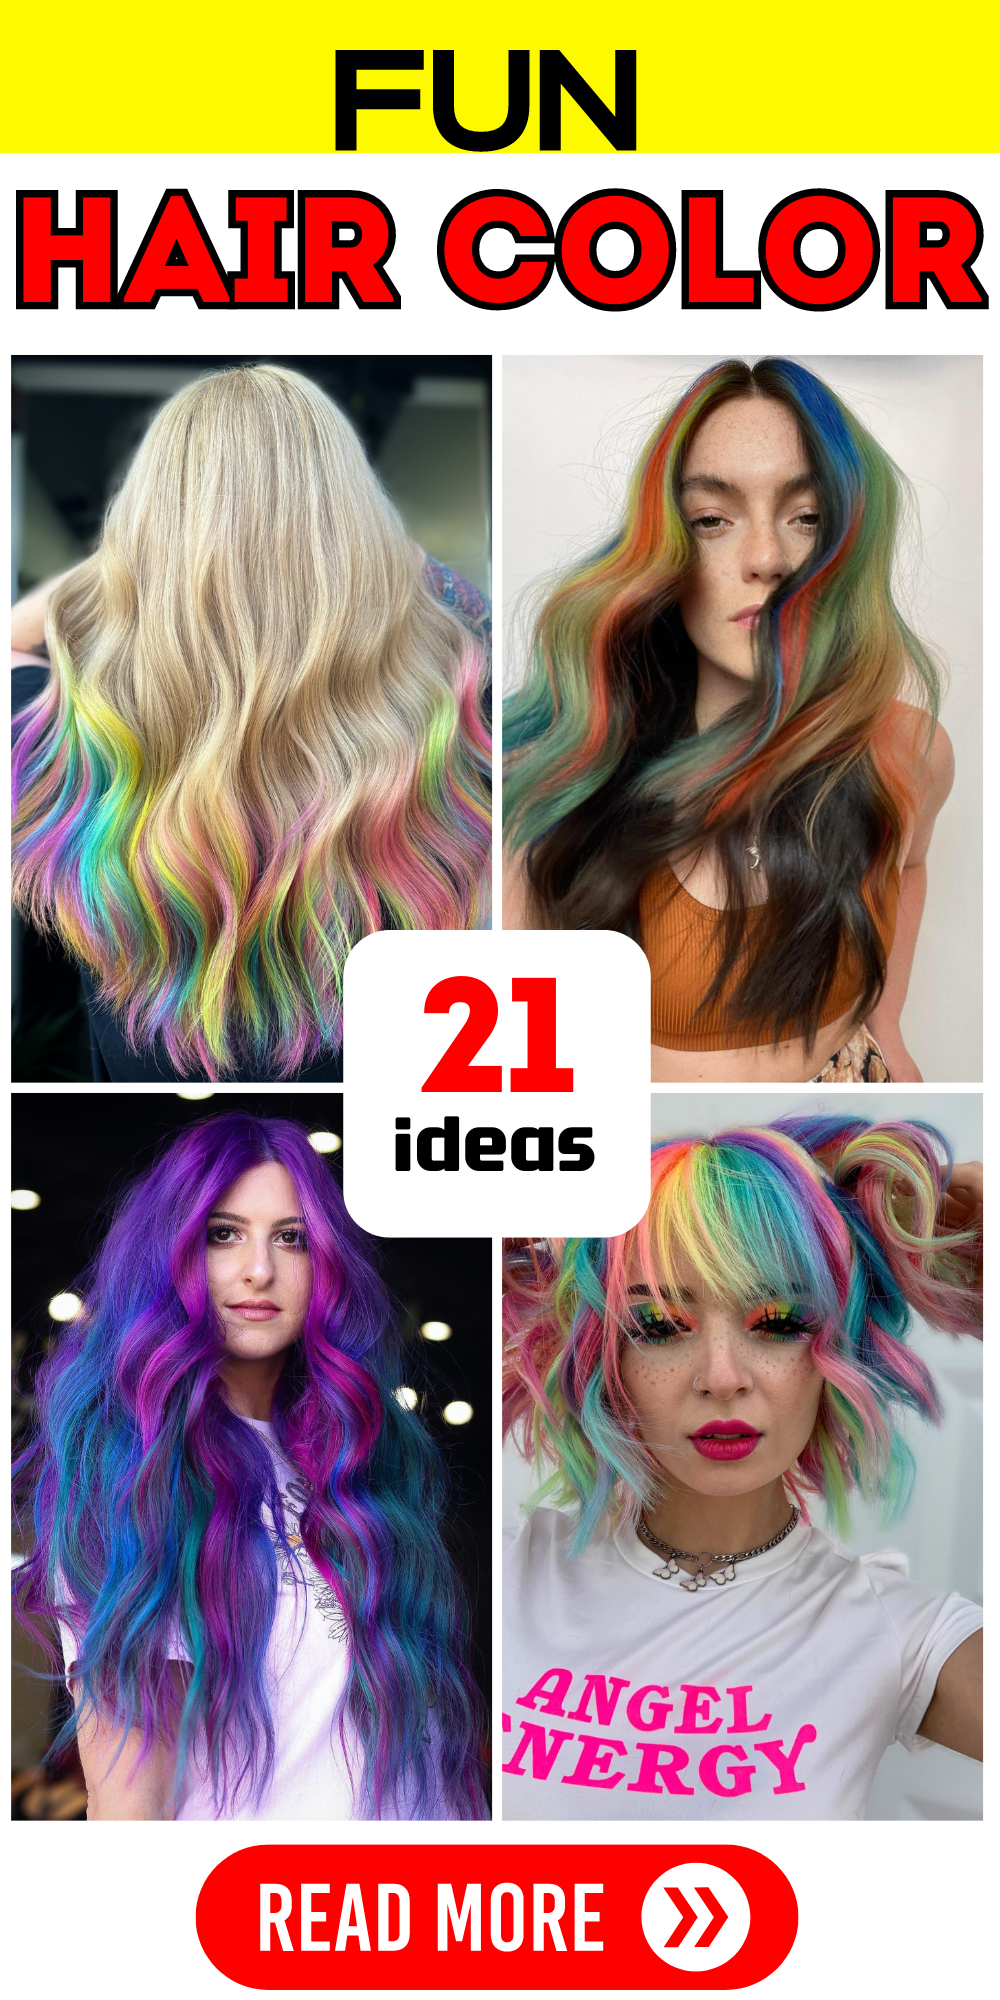 Vibrant Summer Hair Colors - Bold Trends for Sunny Days